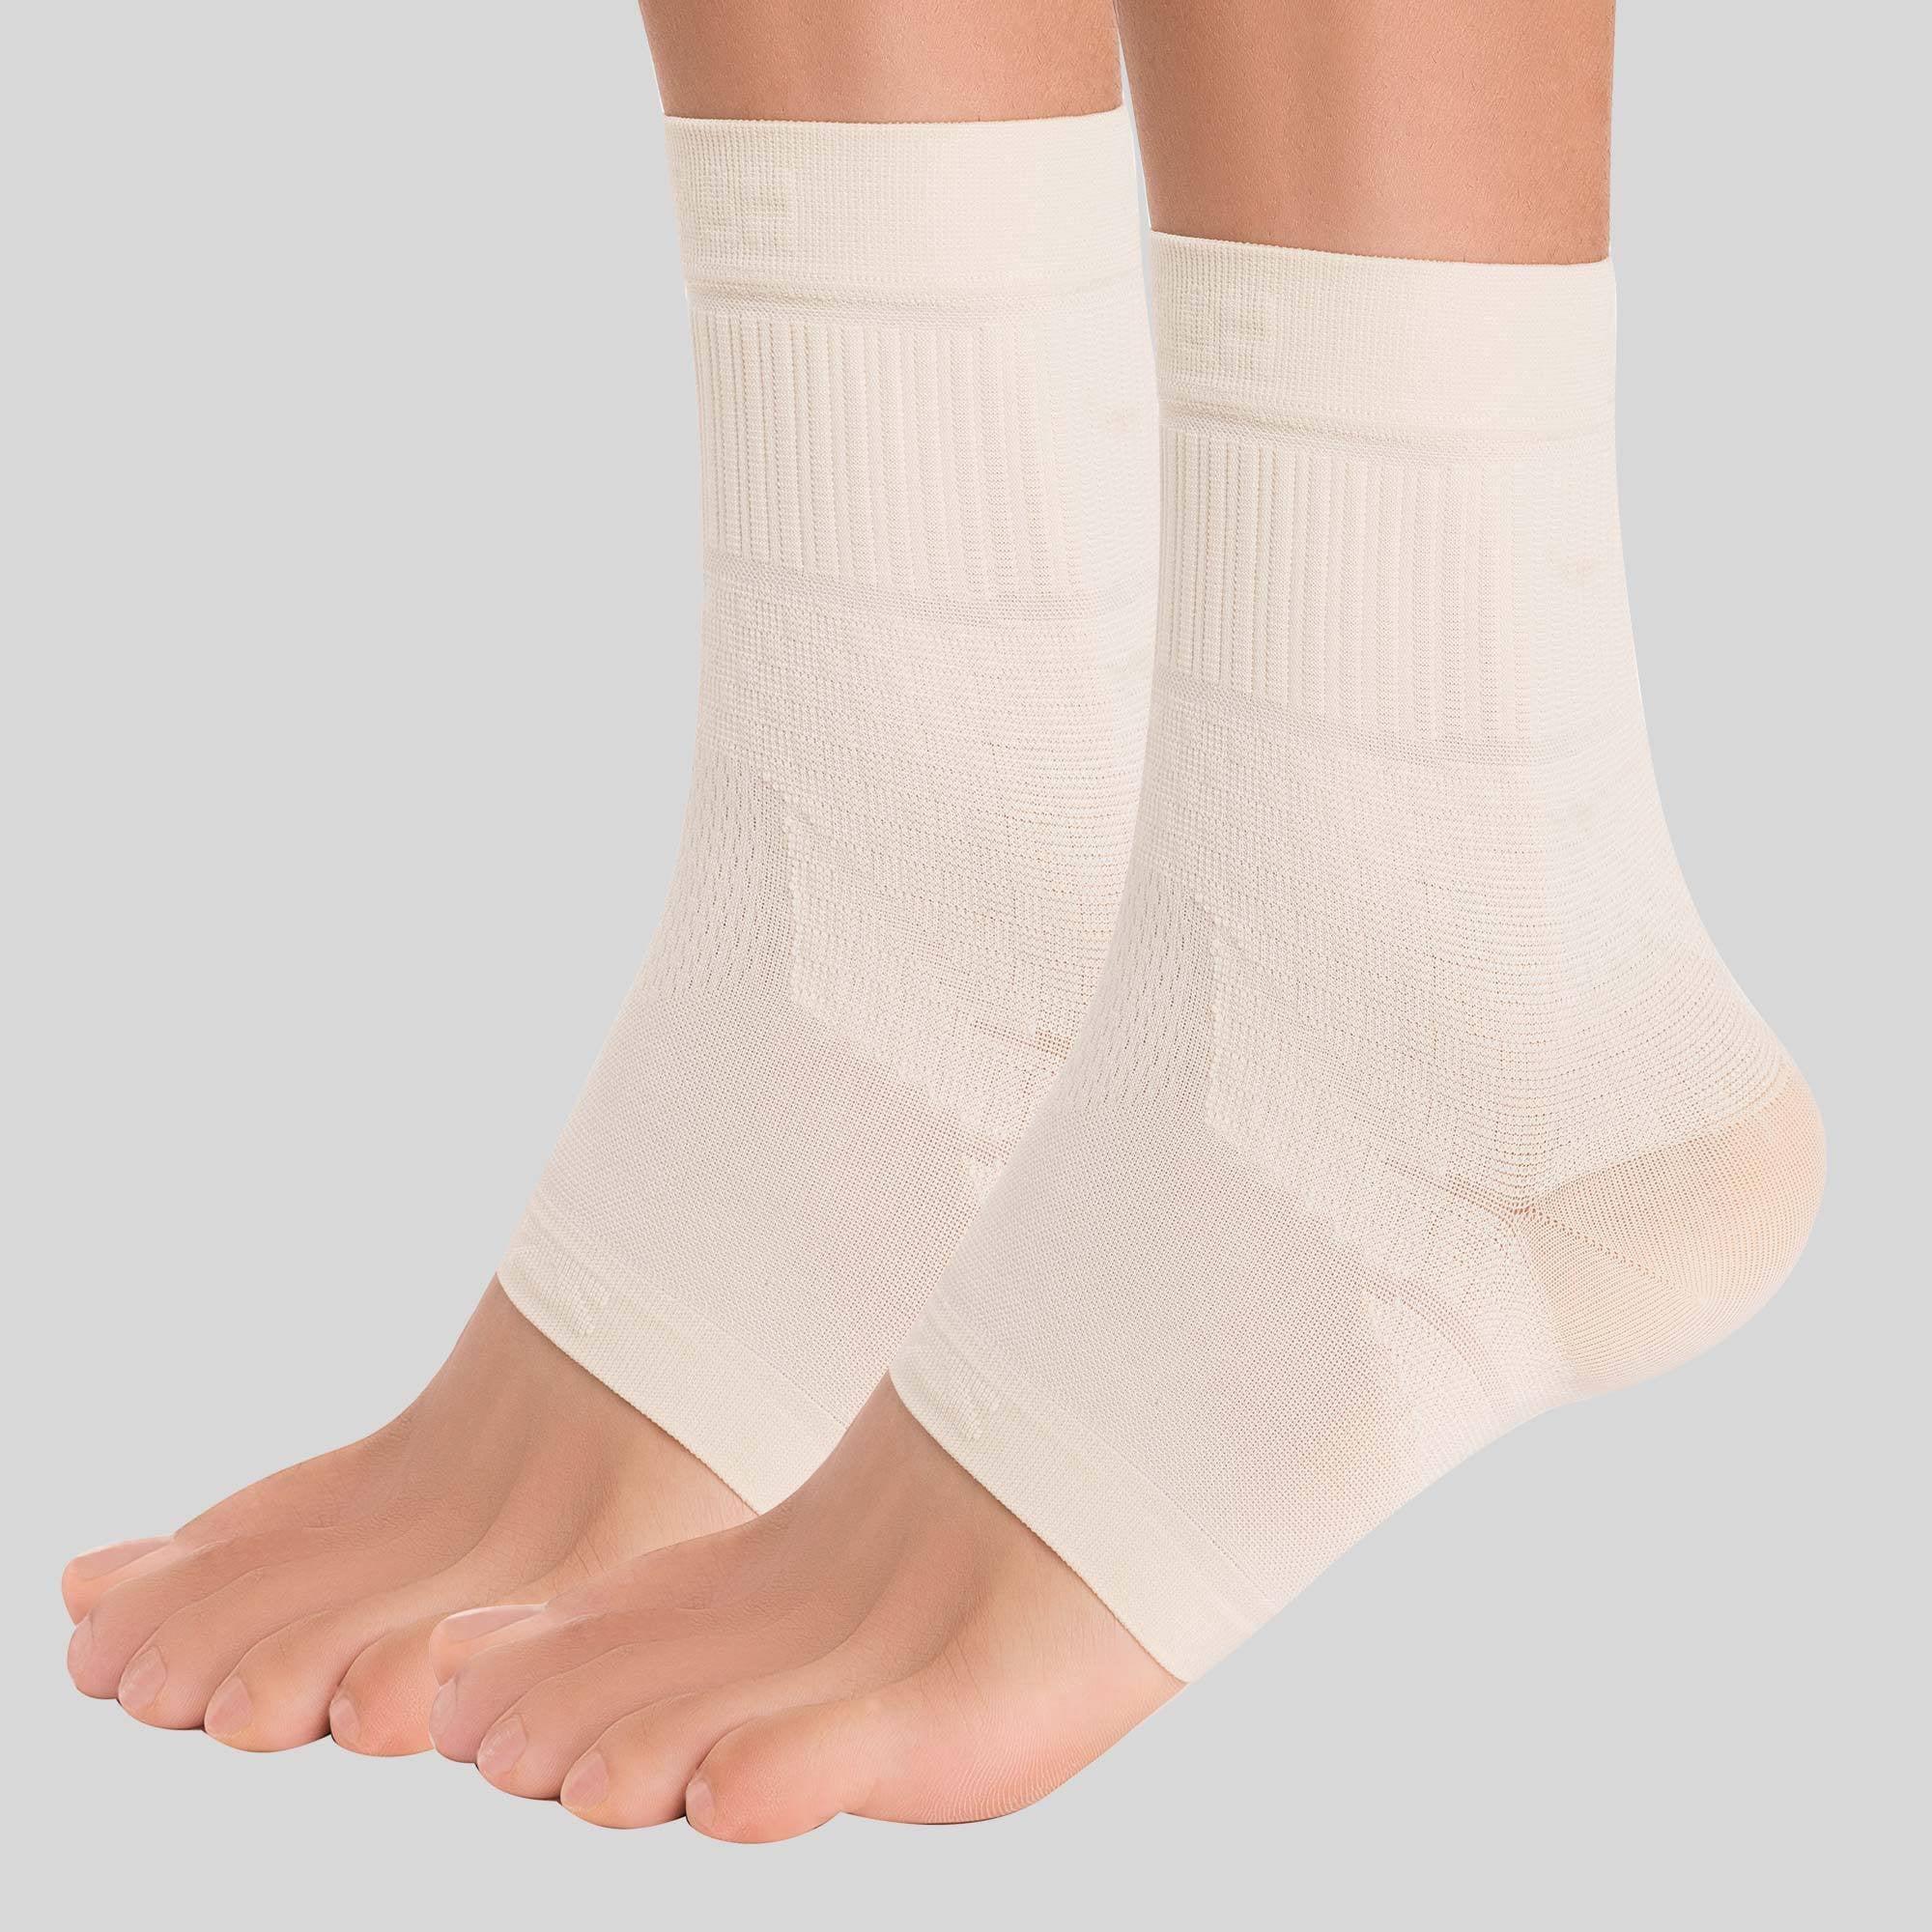 Compression Ankle Support - Ankle Sleeve, Ankle Brace | Zensah